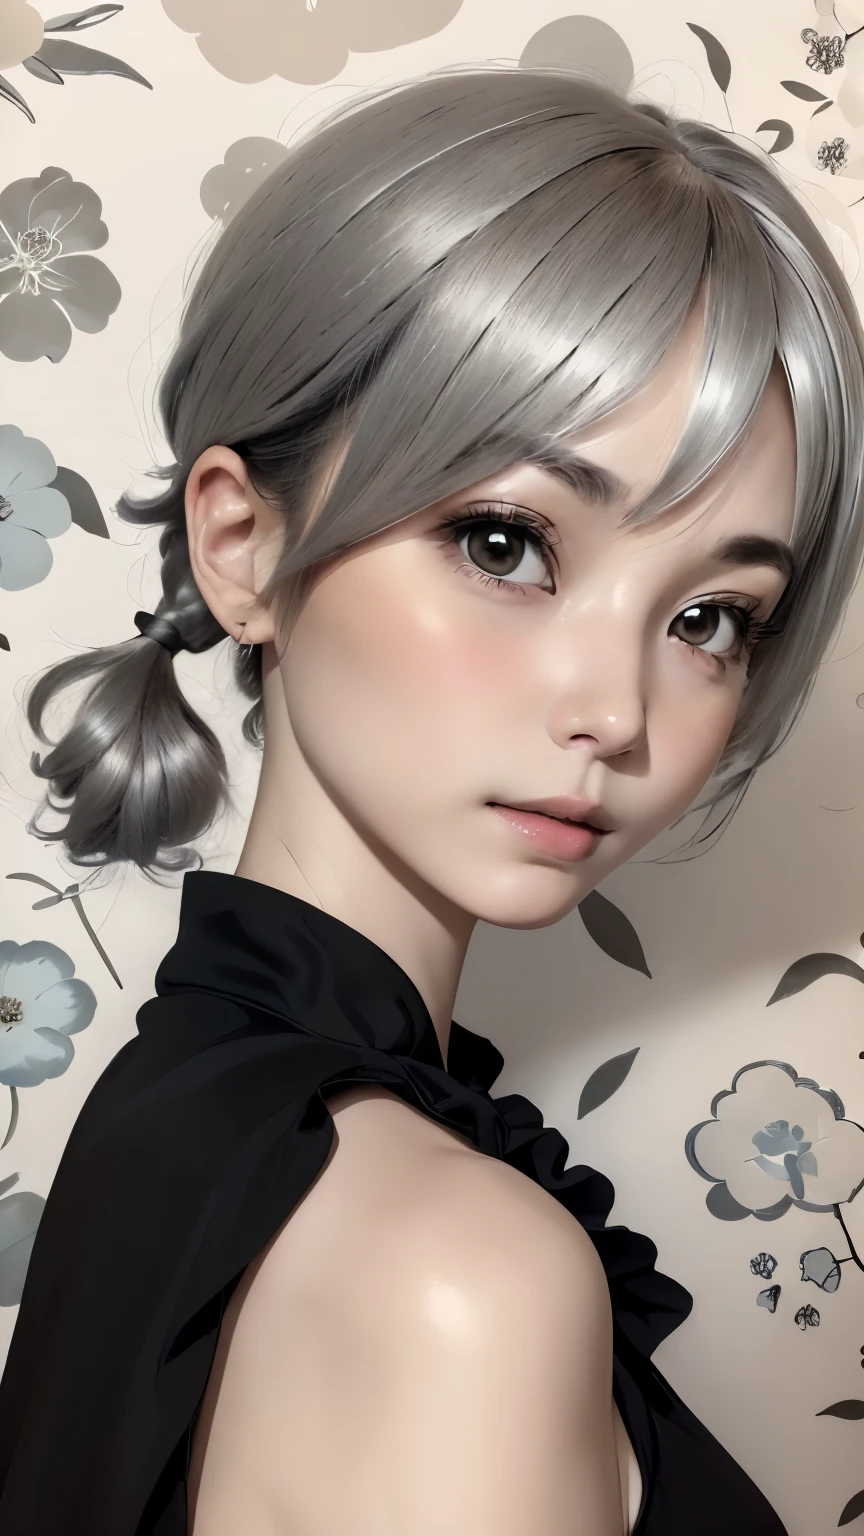 ((wallpaper 8k)), ((surreal)), ((Quality with attention to detail:1.2)), 1 girl, １４talent、kind eyes、plump lips、Ash gray hair、An ennui look、small breasts、small breasts、black elegant dress,Black capelet, look up, Widespread poverty, short cut hair、short hair twintails、Ash gray hair:1.5、white skin、